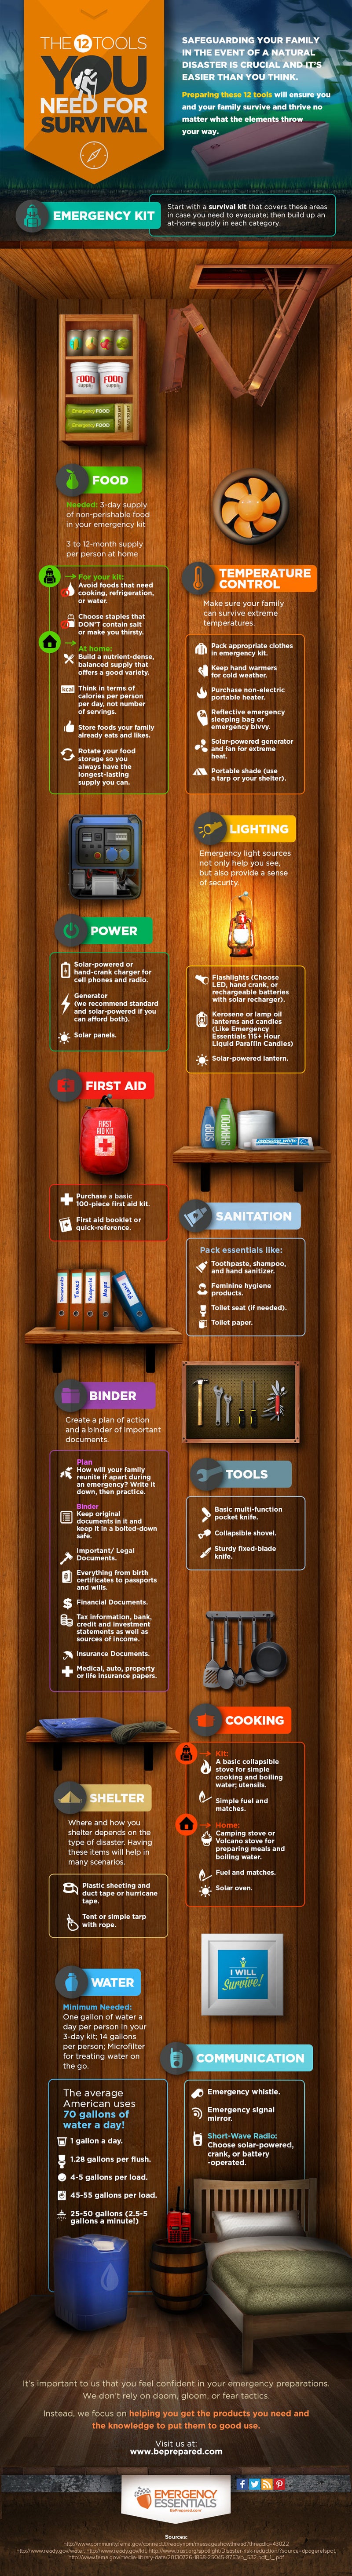 Infographic: 12 Tools You Need for Survival in Any Emergency